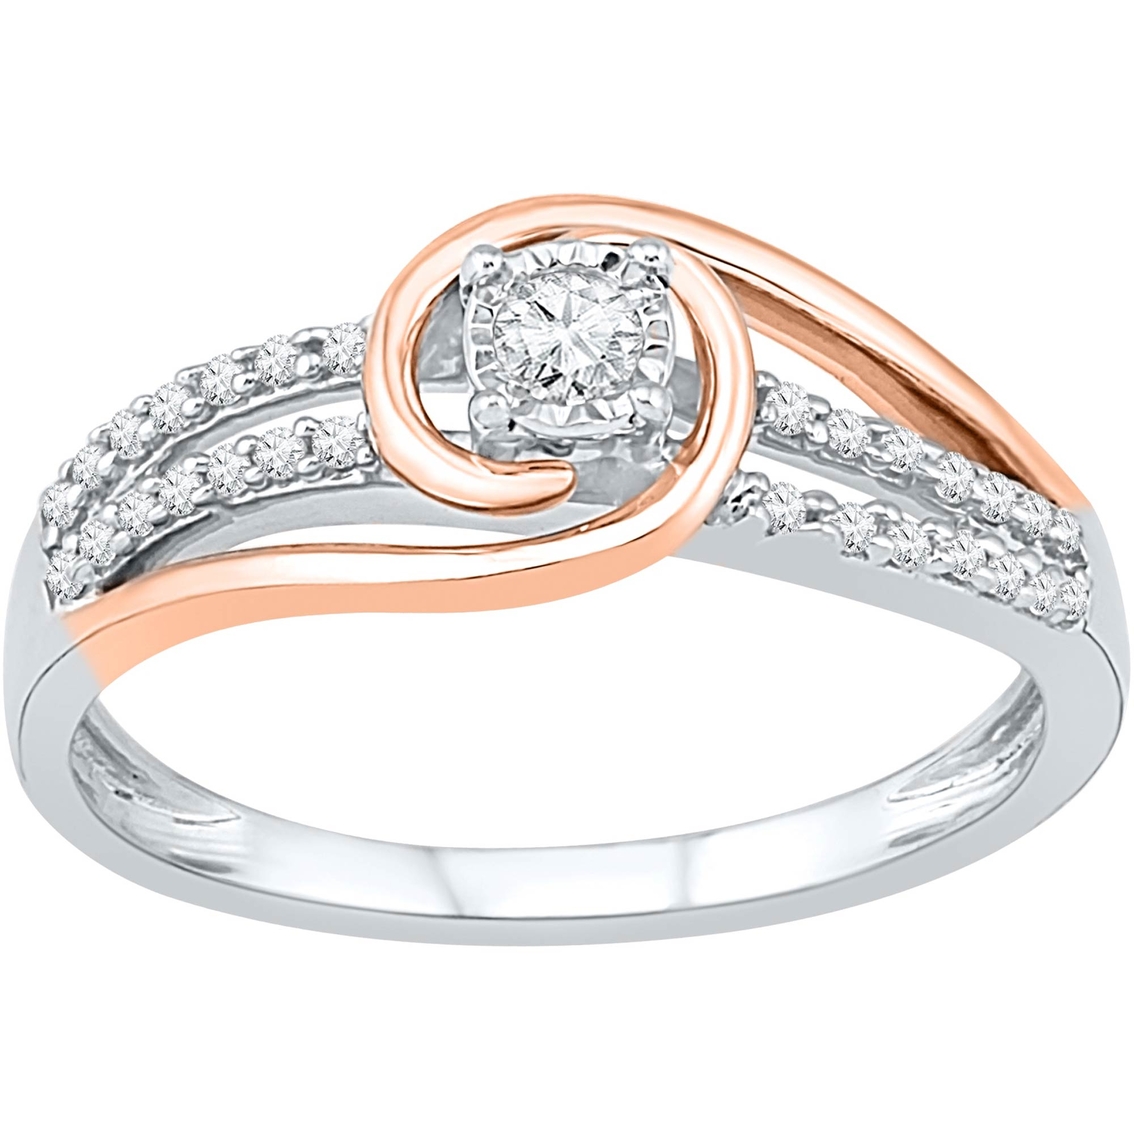 10k White And Pink Gold 1/6 Ctw Diamond Promise Ring | Promise Rings ...